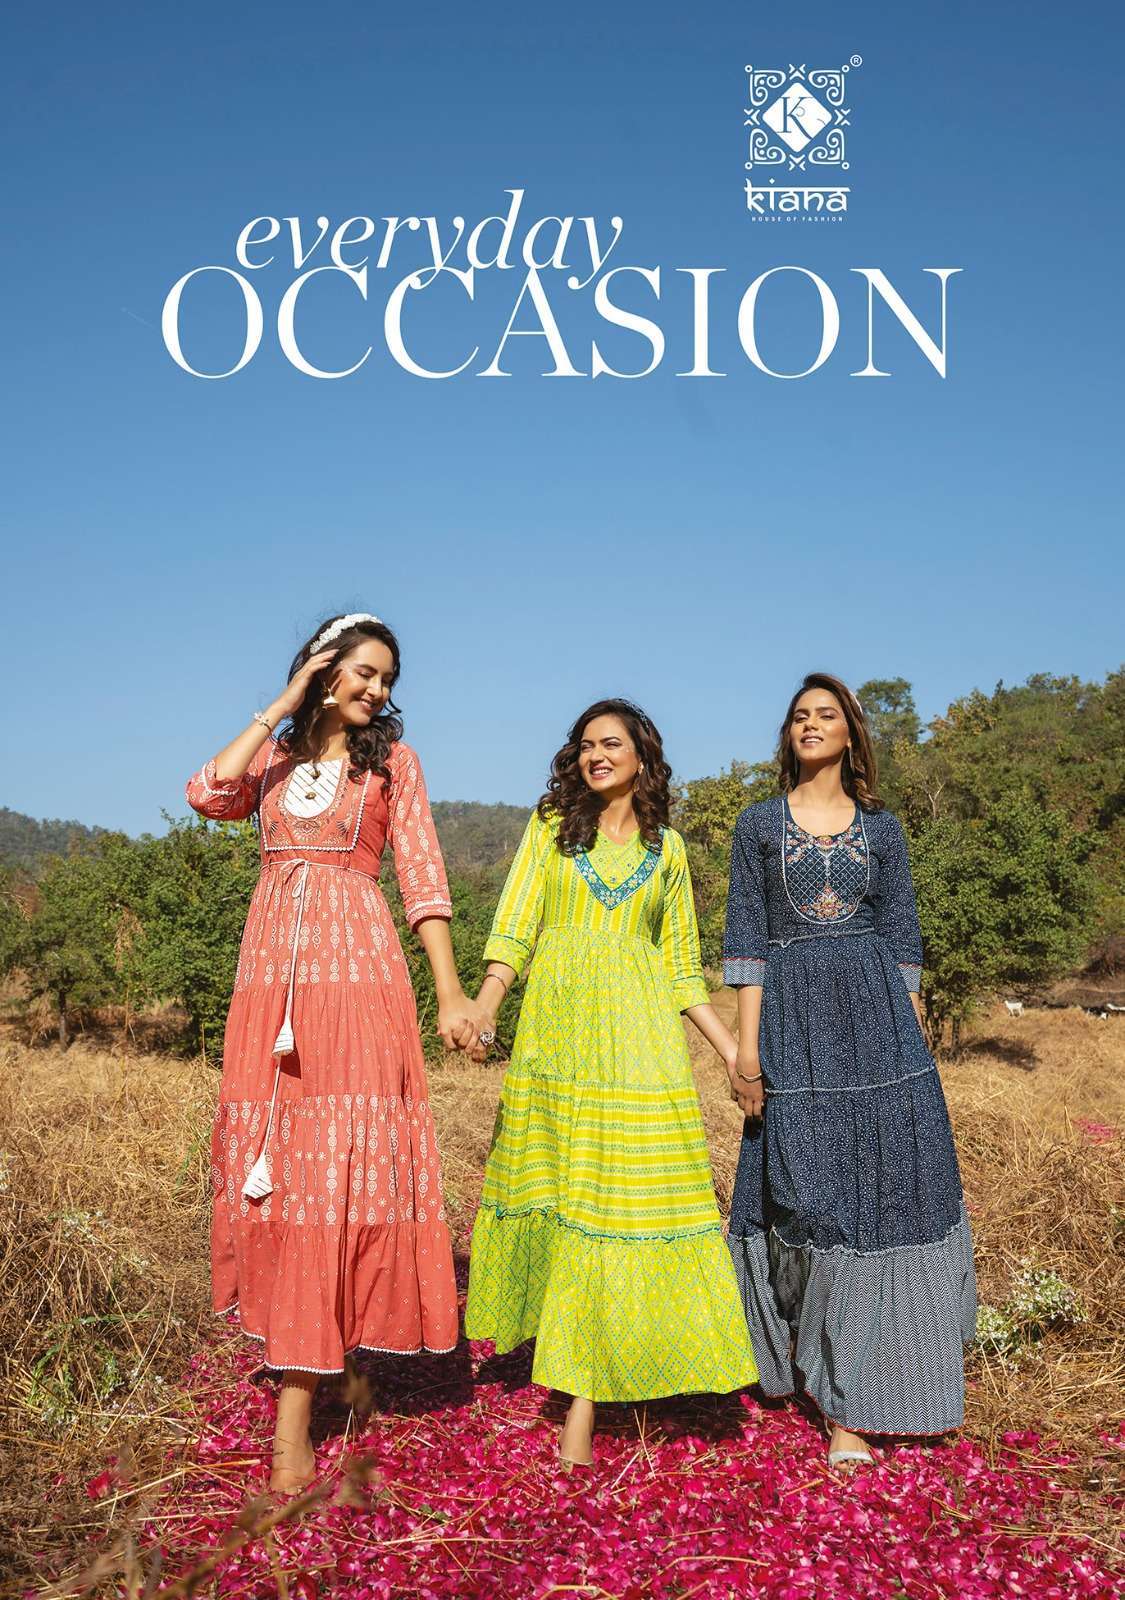 KIANA PRESENTS EVERYDAY OCCASION READYMADE SUMMER SEASON GOWN WEAR KURTI CATALOG WHOLESALER AND EXPORTER IN SURAT  